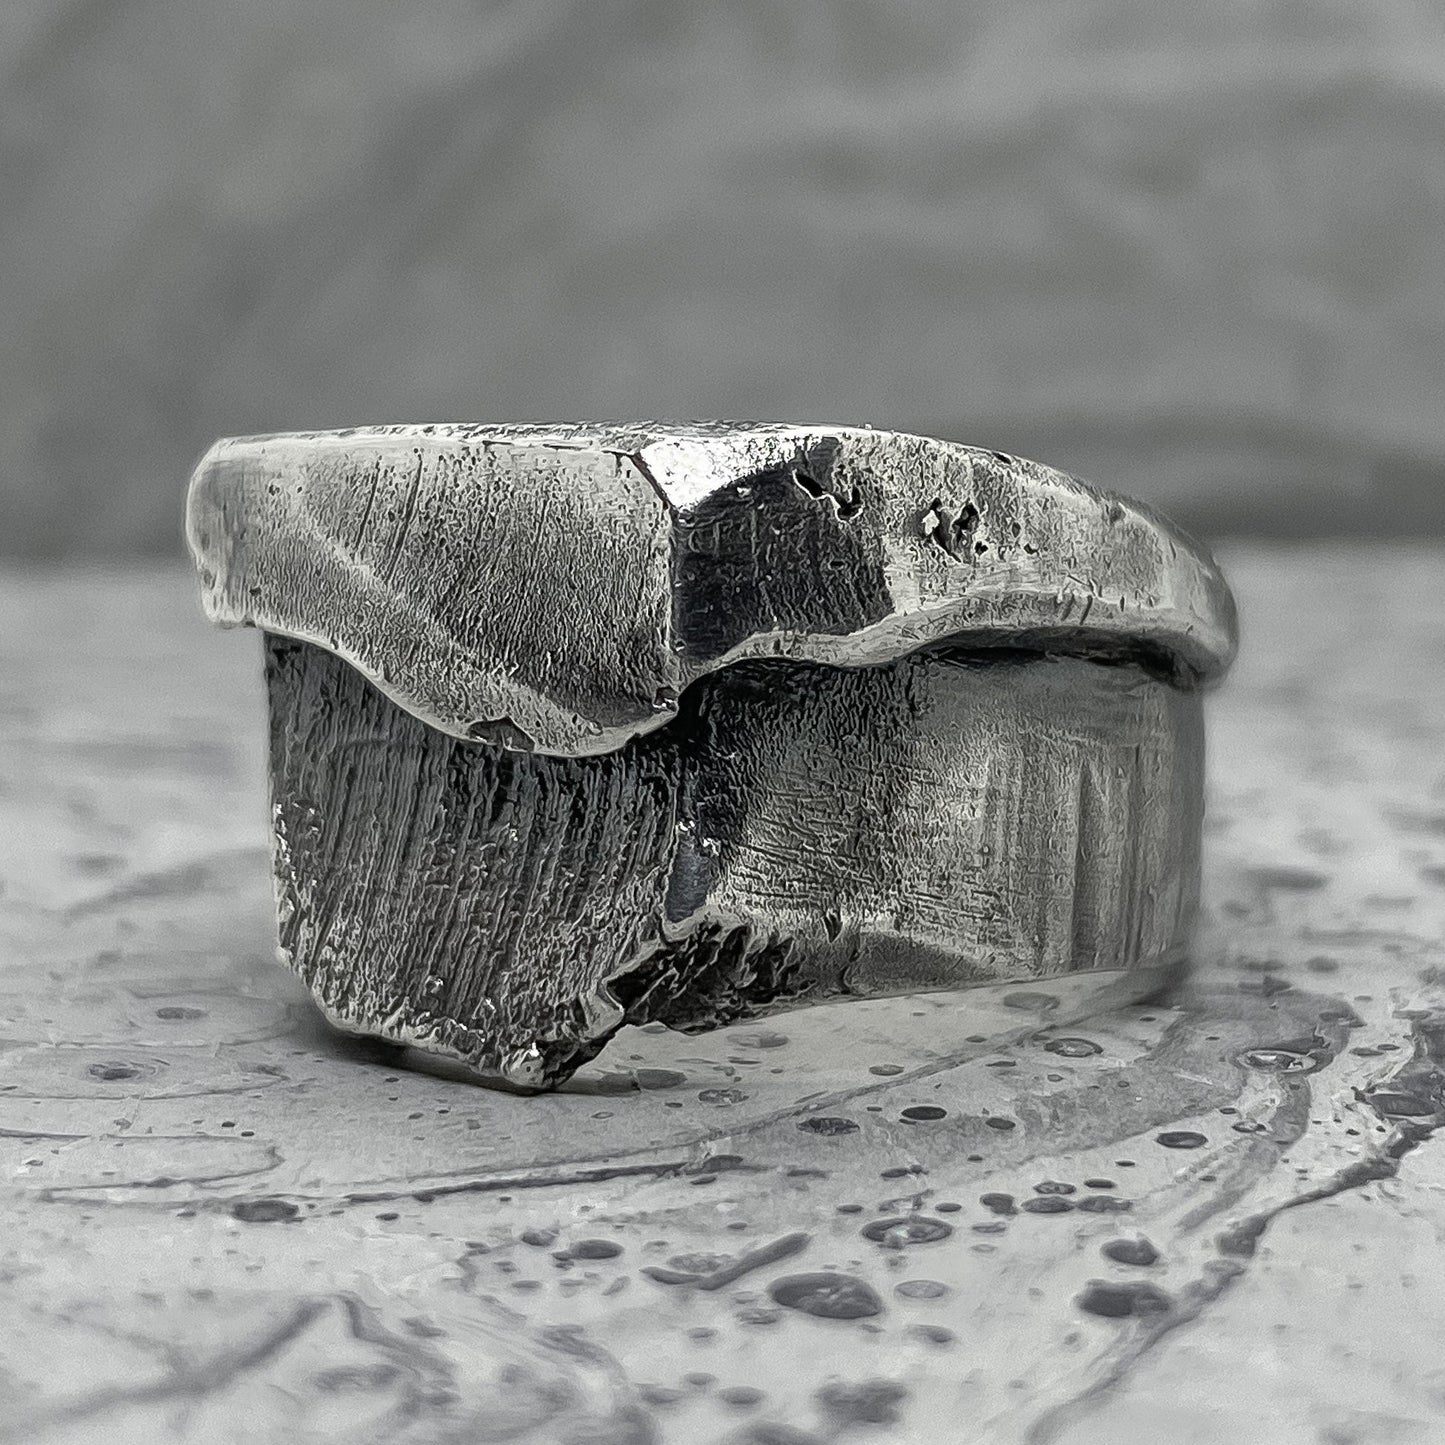 Union ring -massive ring with a combination of two shapes and textures Unusual rings Project50g 